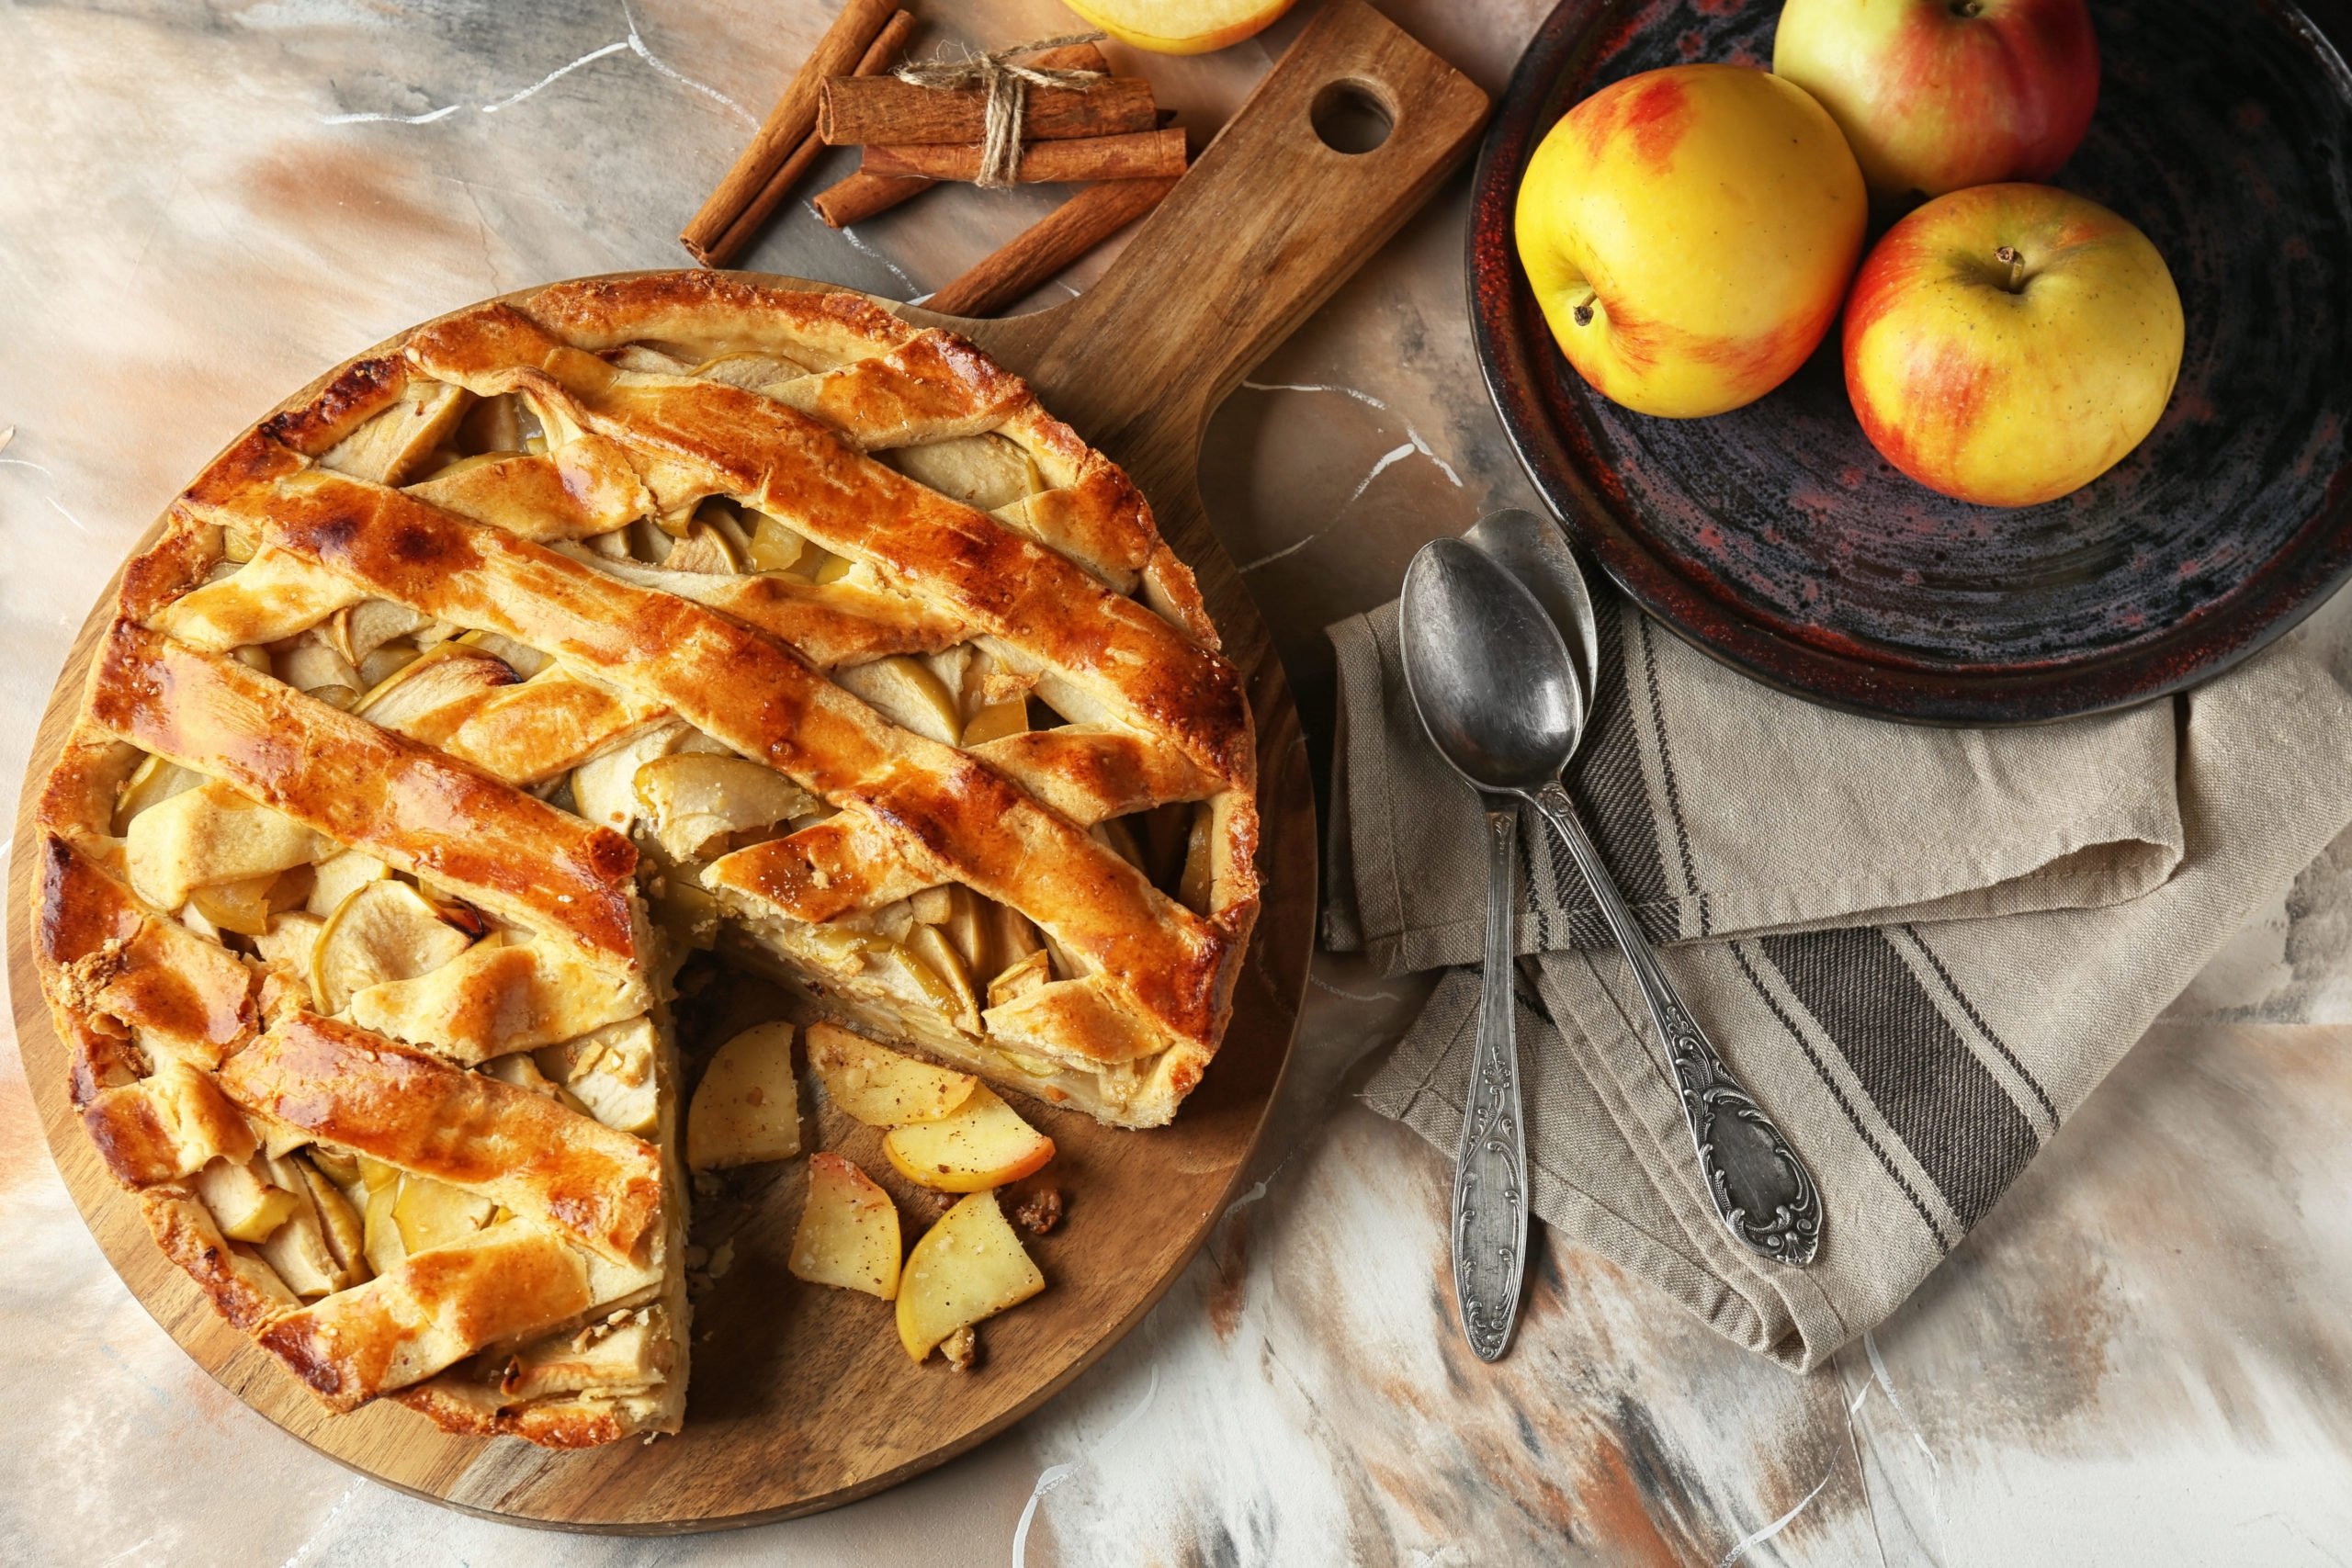 Best, Simple and Easy Homemade Apple Pie Recipe from Scratch